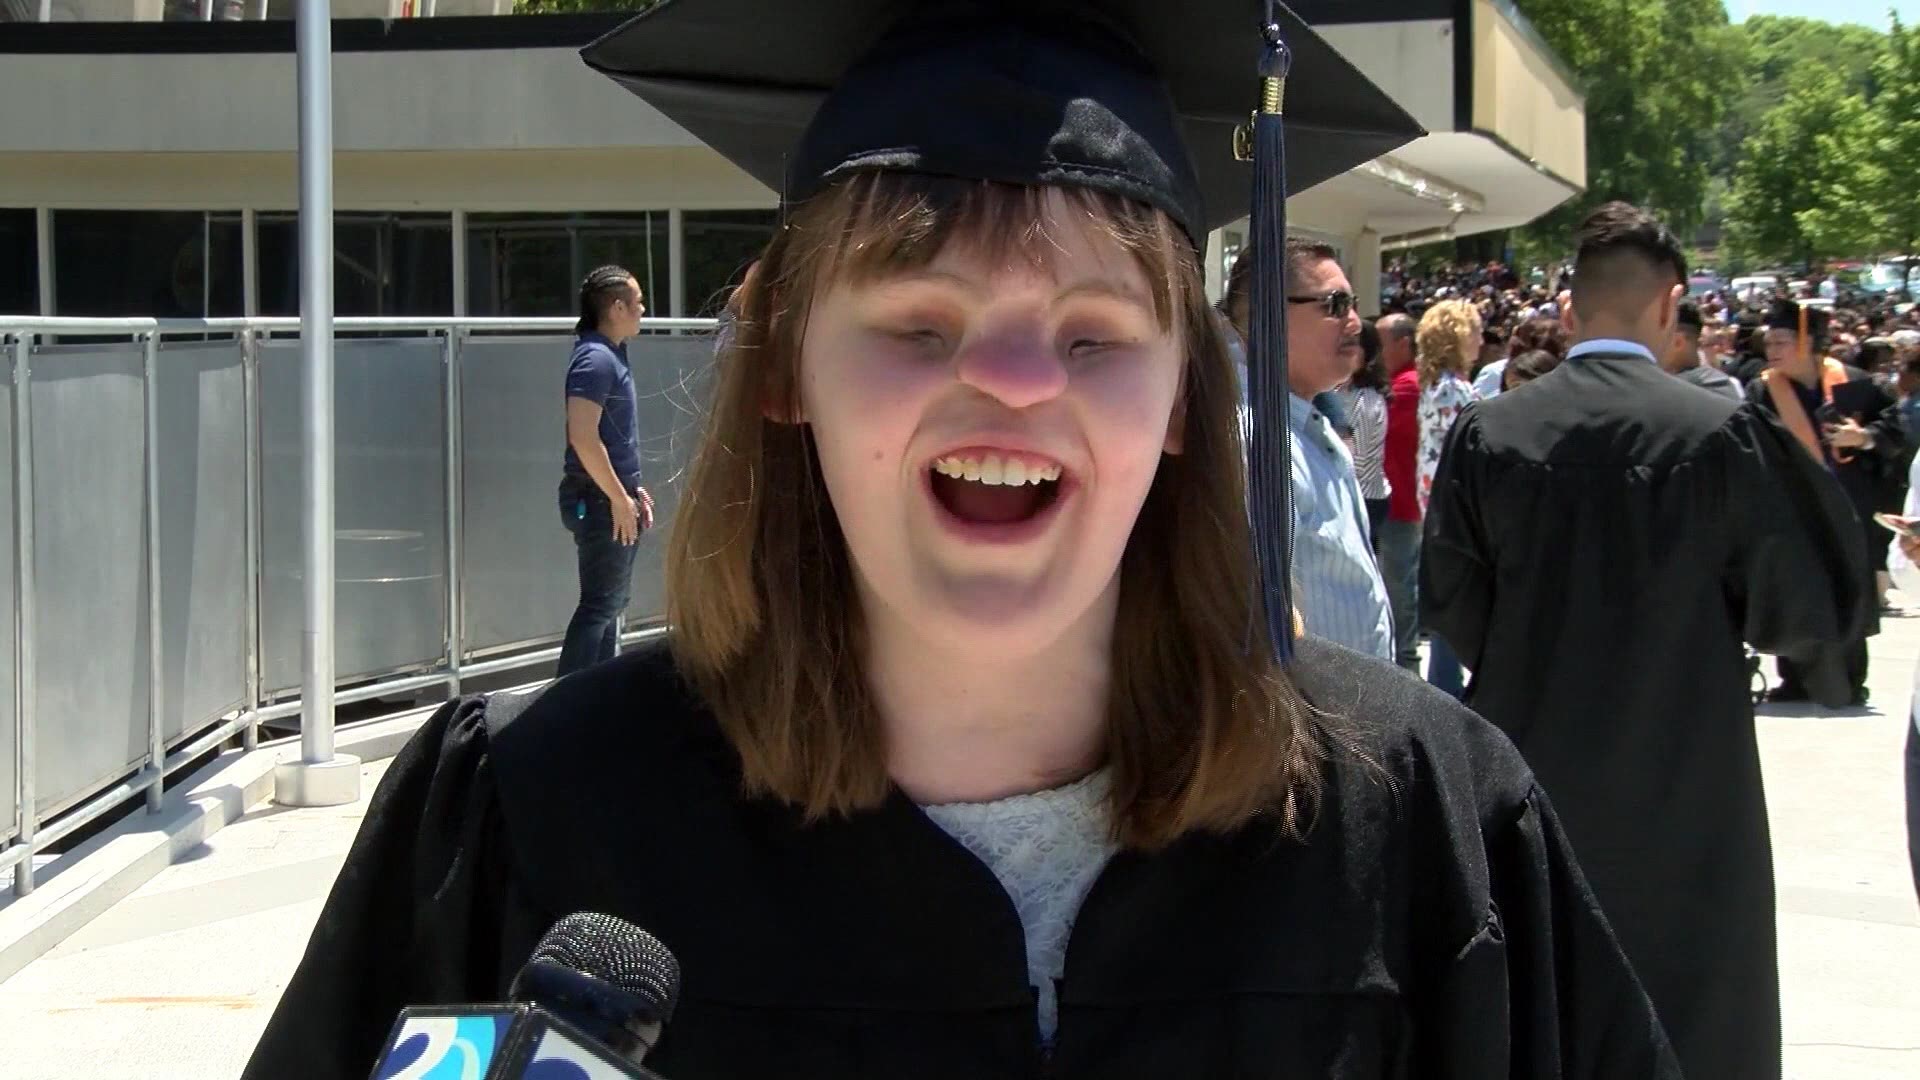 Cassidy Hooper is one of only a few people in the world born with no eyes and no nose. She's now 22 and just graduated from Central Piedmont Community College with an Associates of Arts degree.